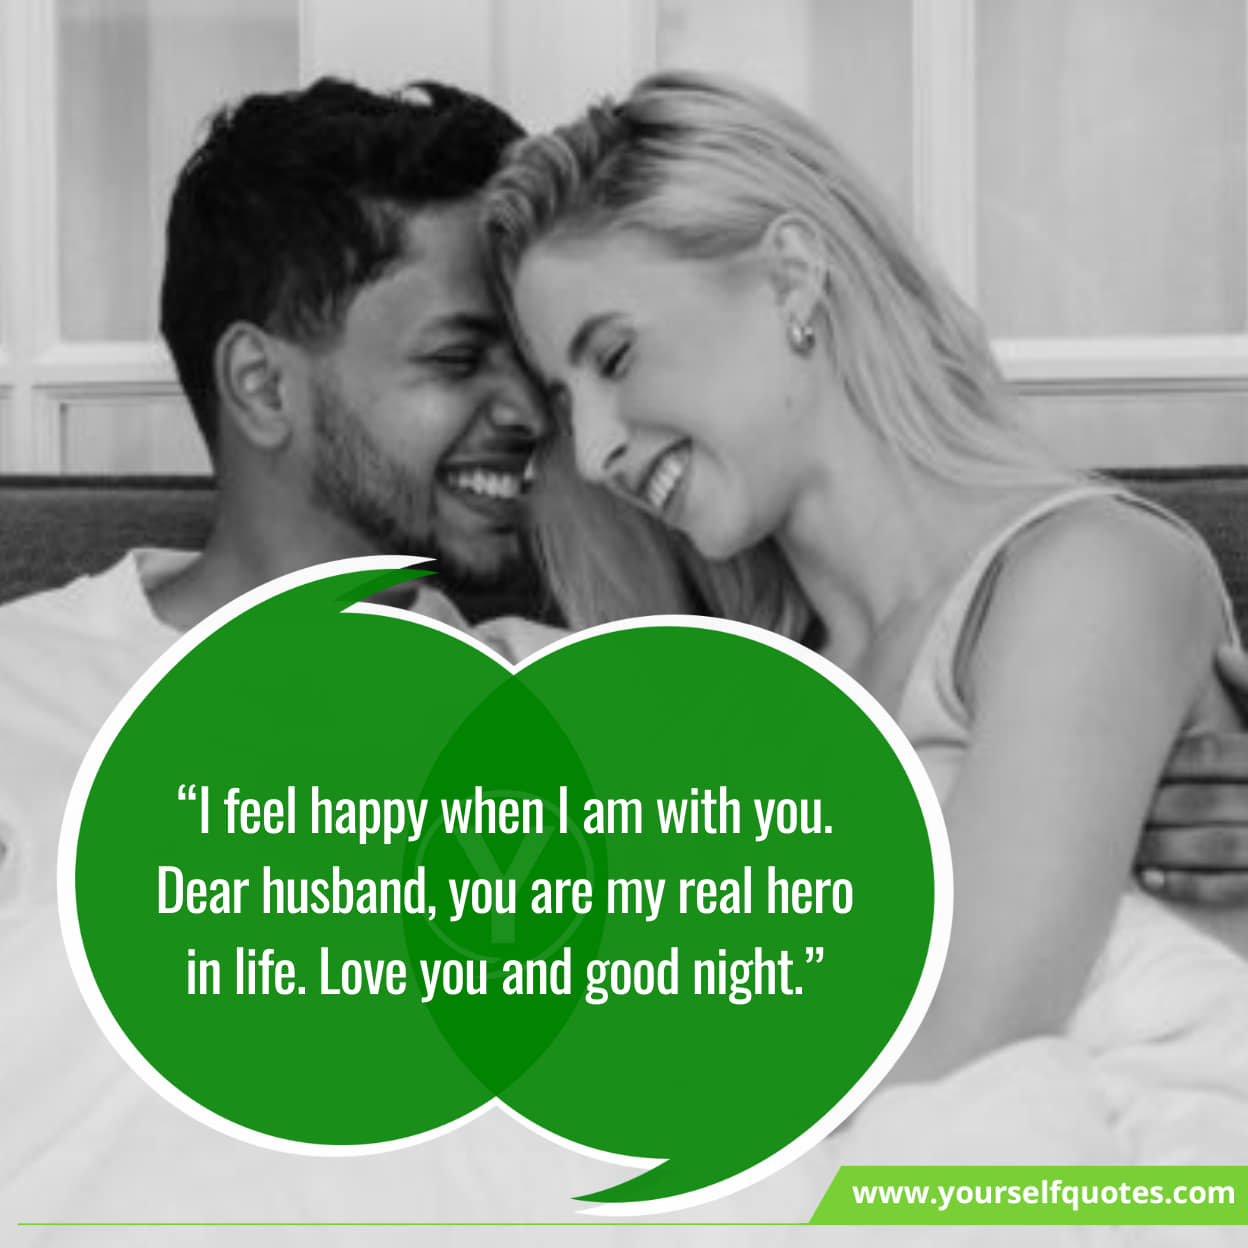 Good Night Messages Quotes & Sayings for Husband